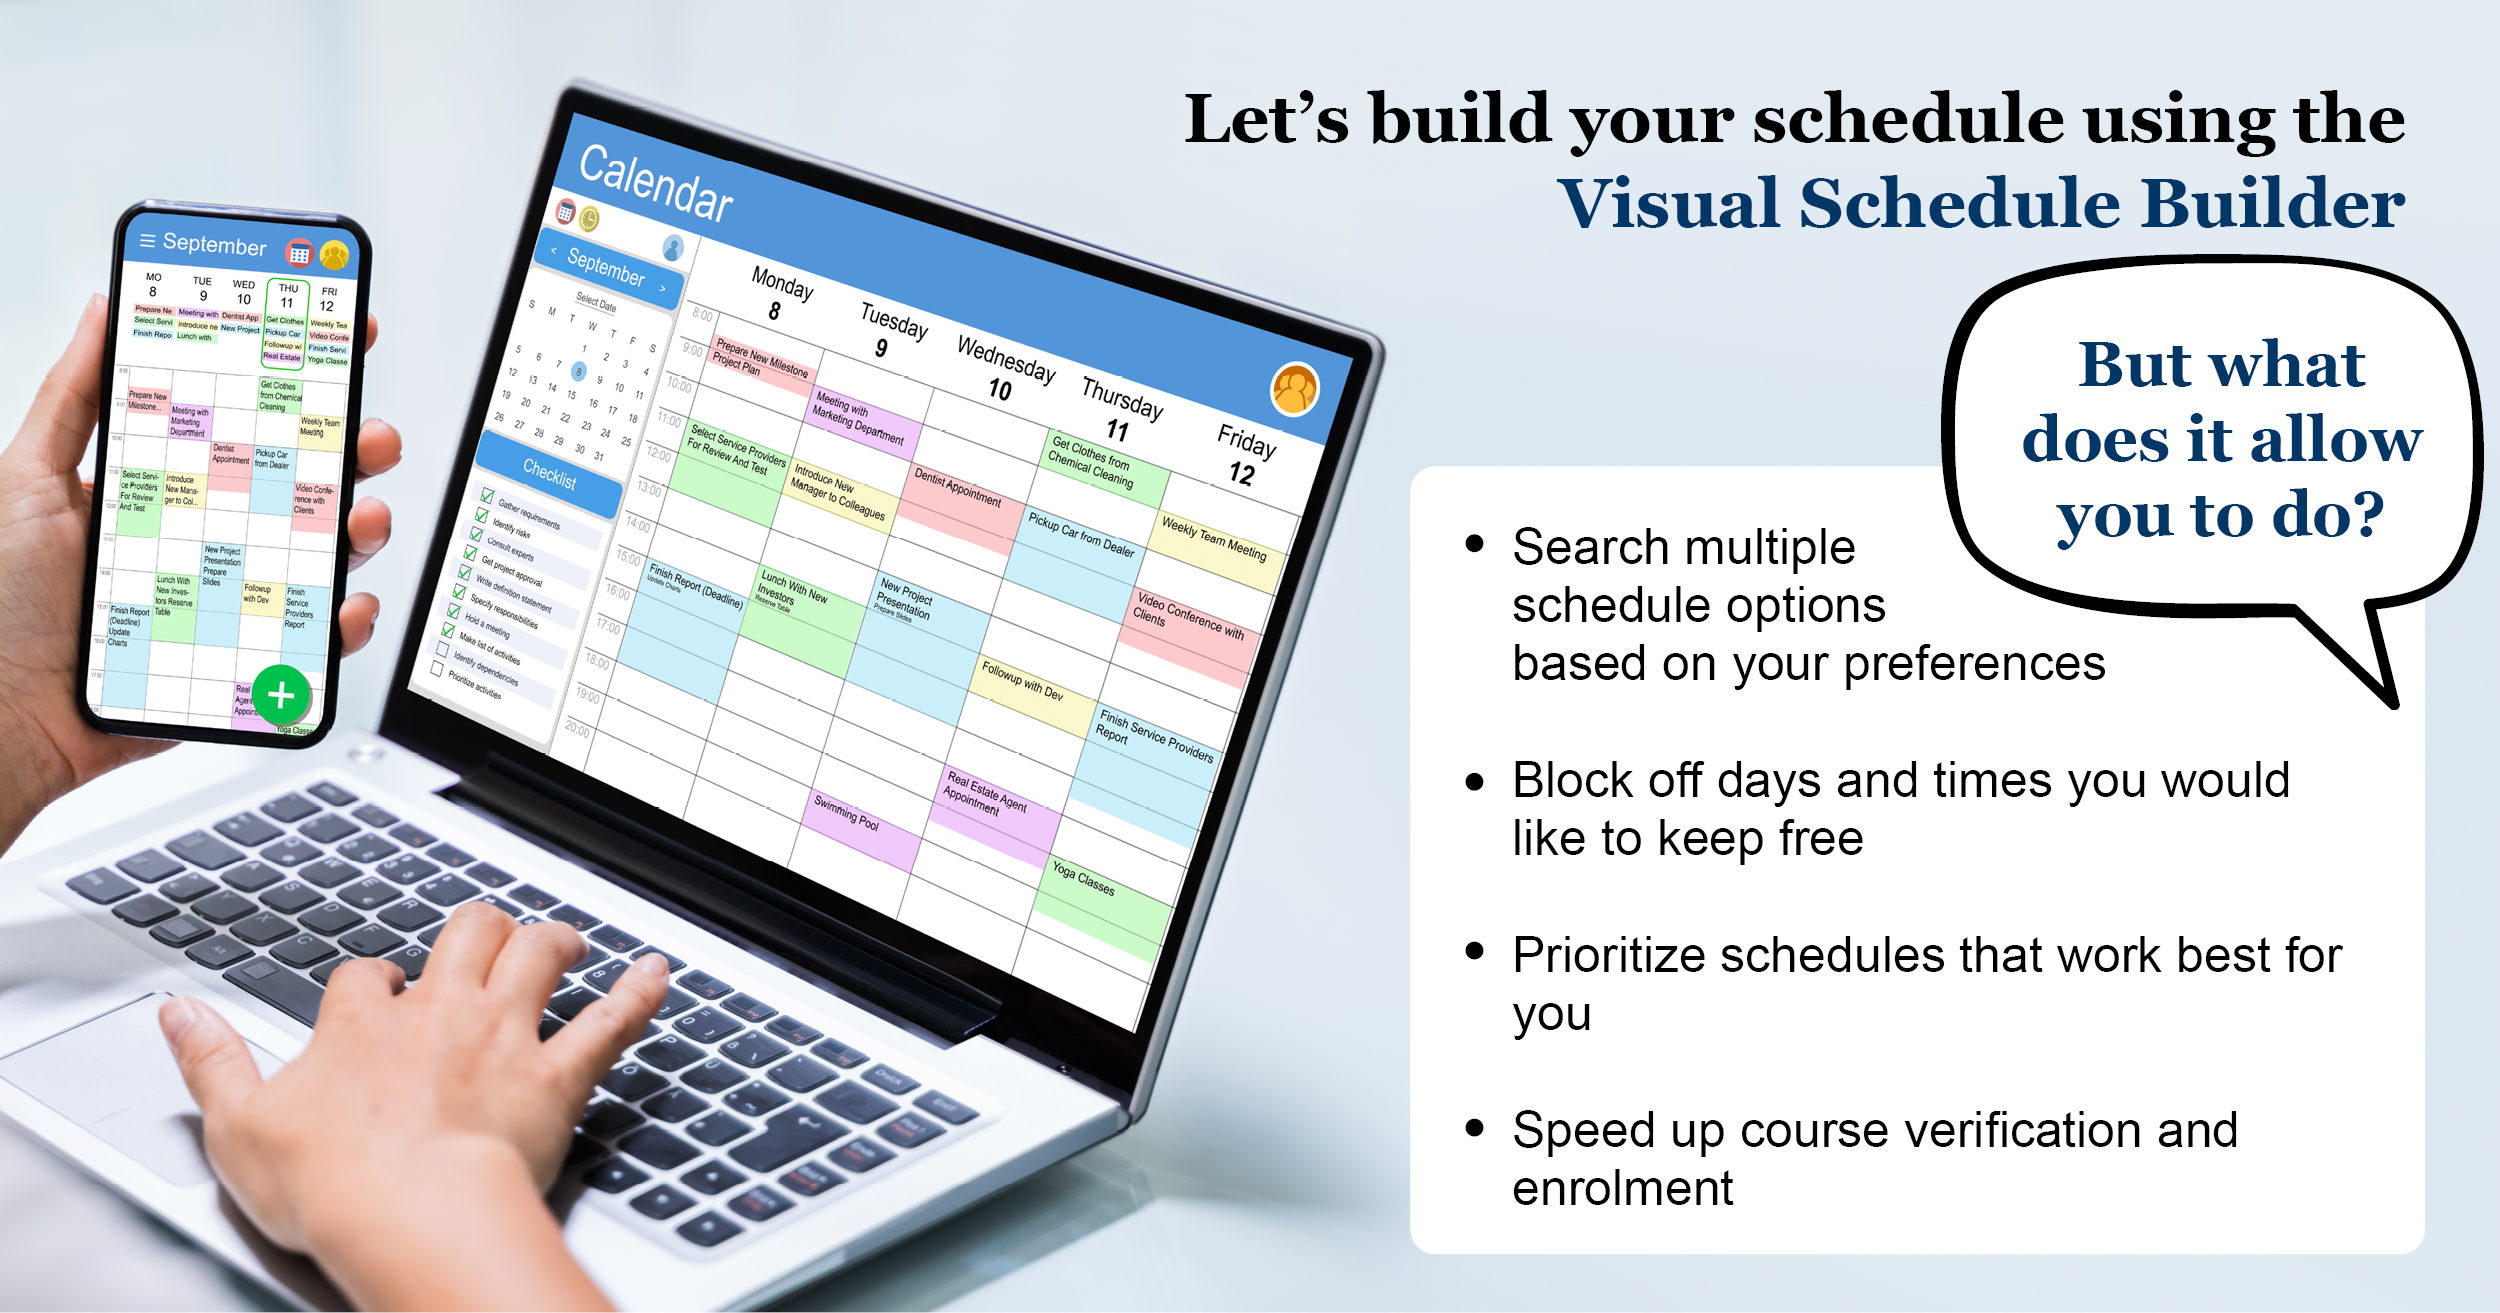 Photo of laptop with schedule and text that reads: Let's build your schedule using the Visual Schedule Builder. But what does it allow you to do? Search multiple schedule options based on your preferences, block off days and times you'd like to keep free, prioritize schedules that work best for you, speed up course verification and enrolment